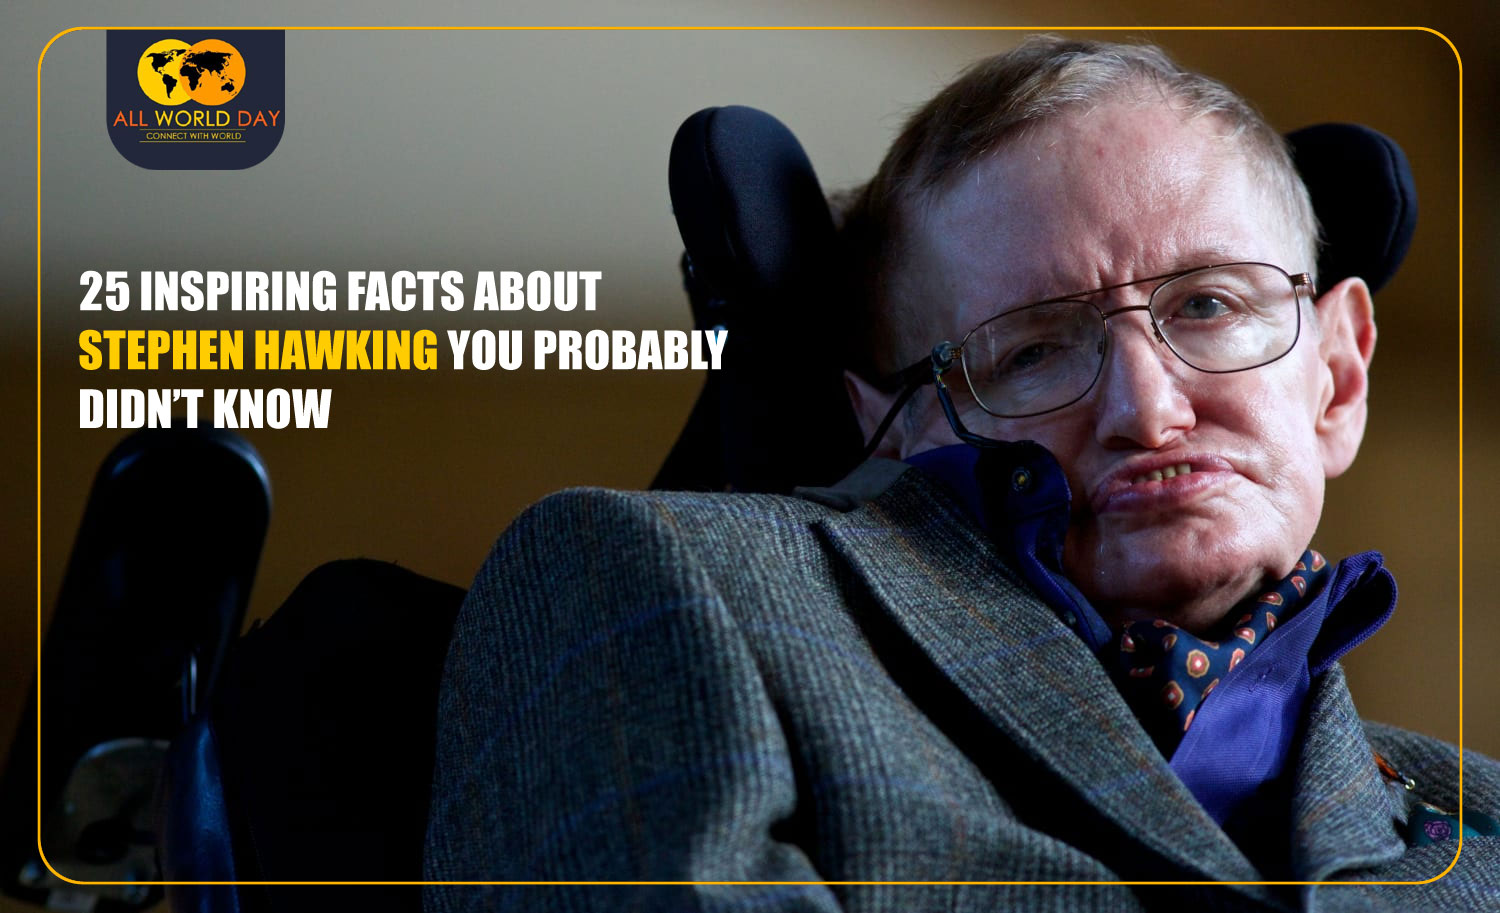 25 Inspiring Facts About Stephen Hawking You Probably Didn’t Know